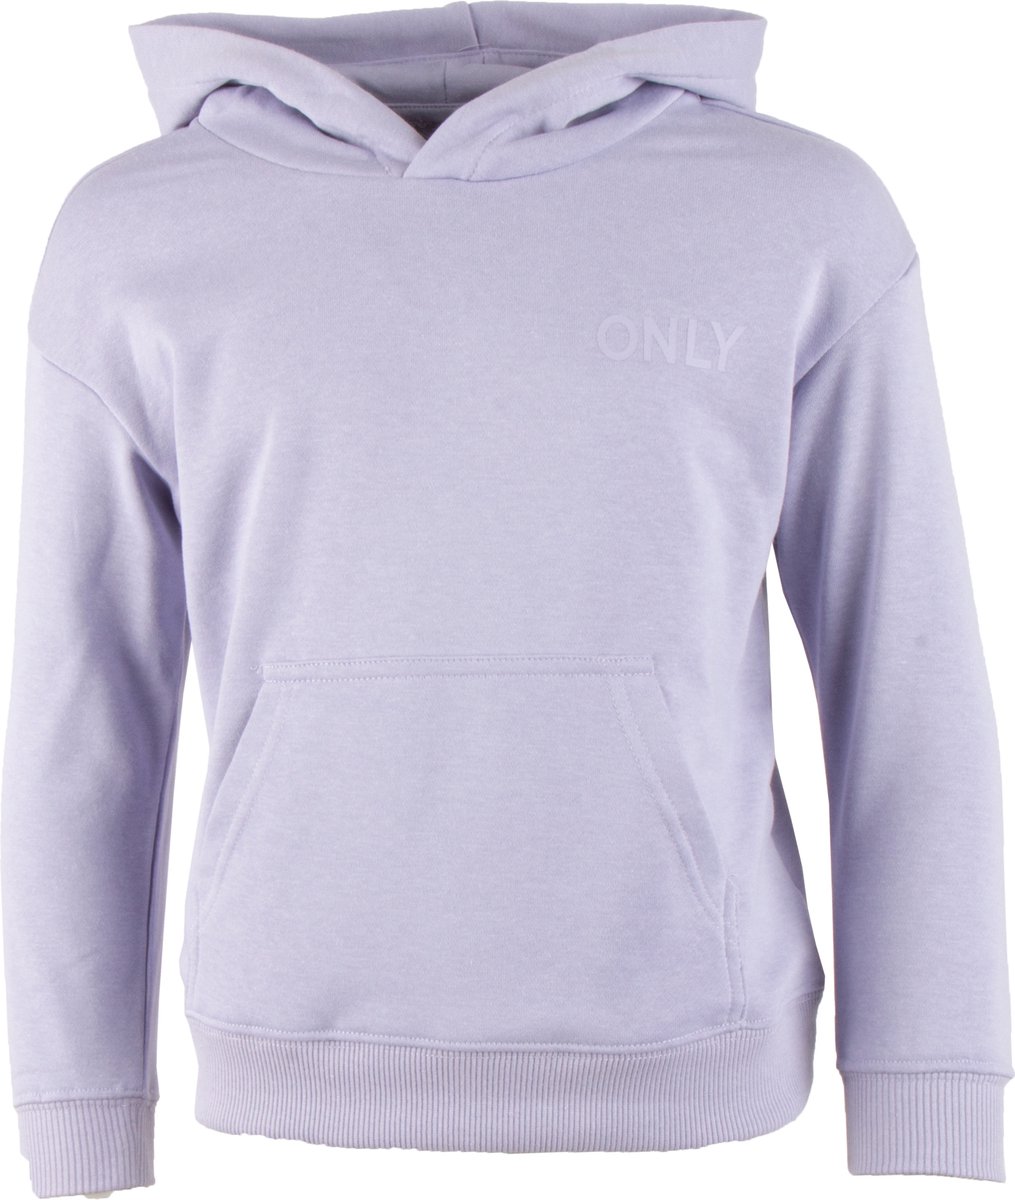 Only Sweater - Paars